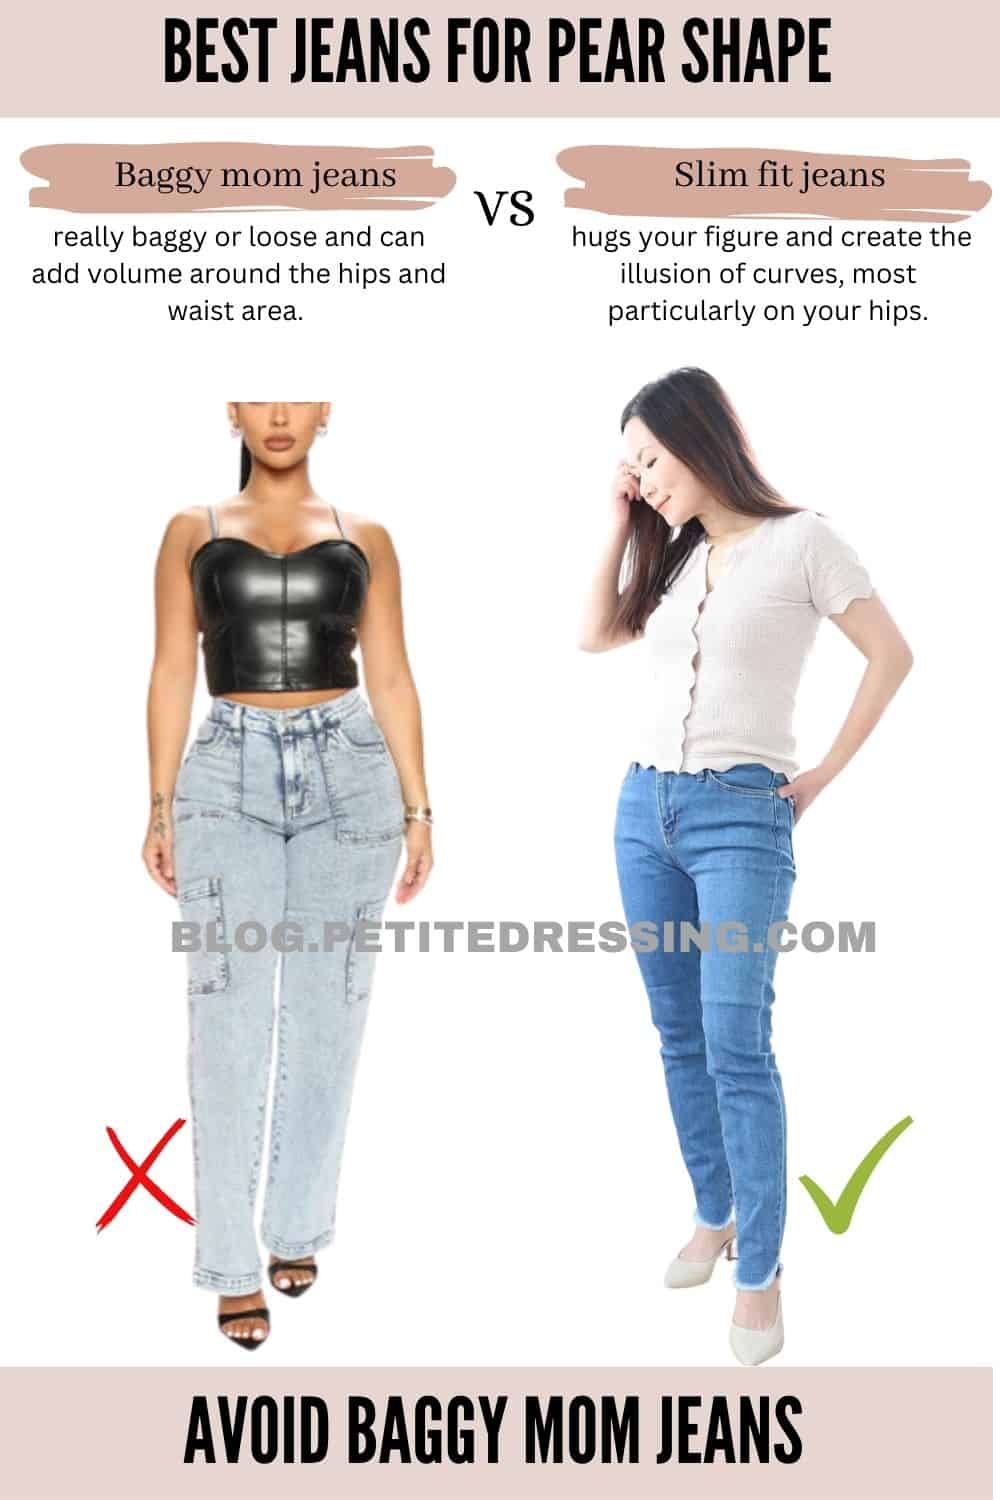 The Complete Jeans Guide for Pear Shape